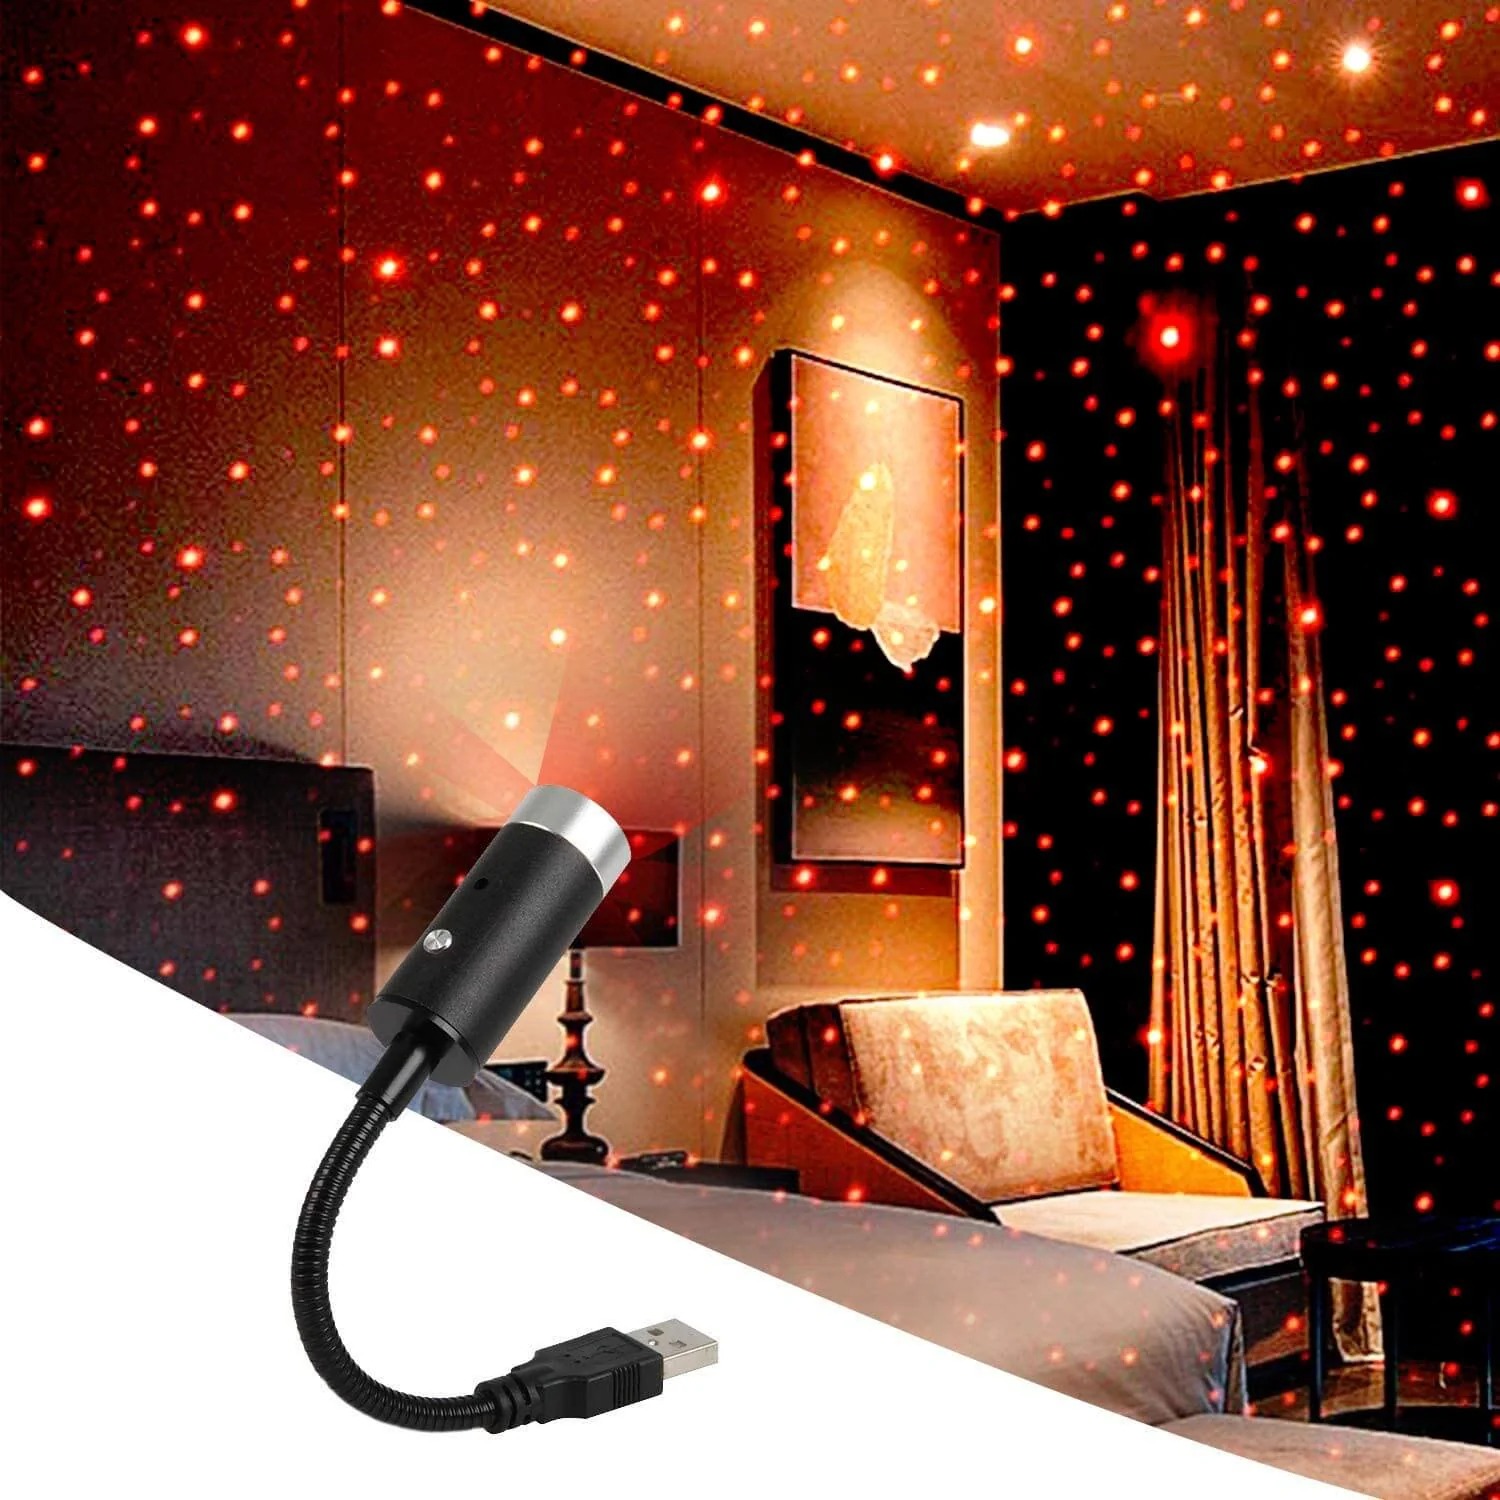 Roof Star Projector Lights, USB Portable, Decoration